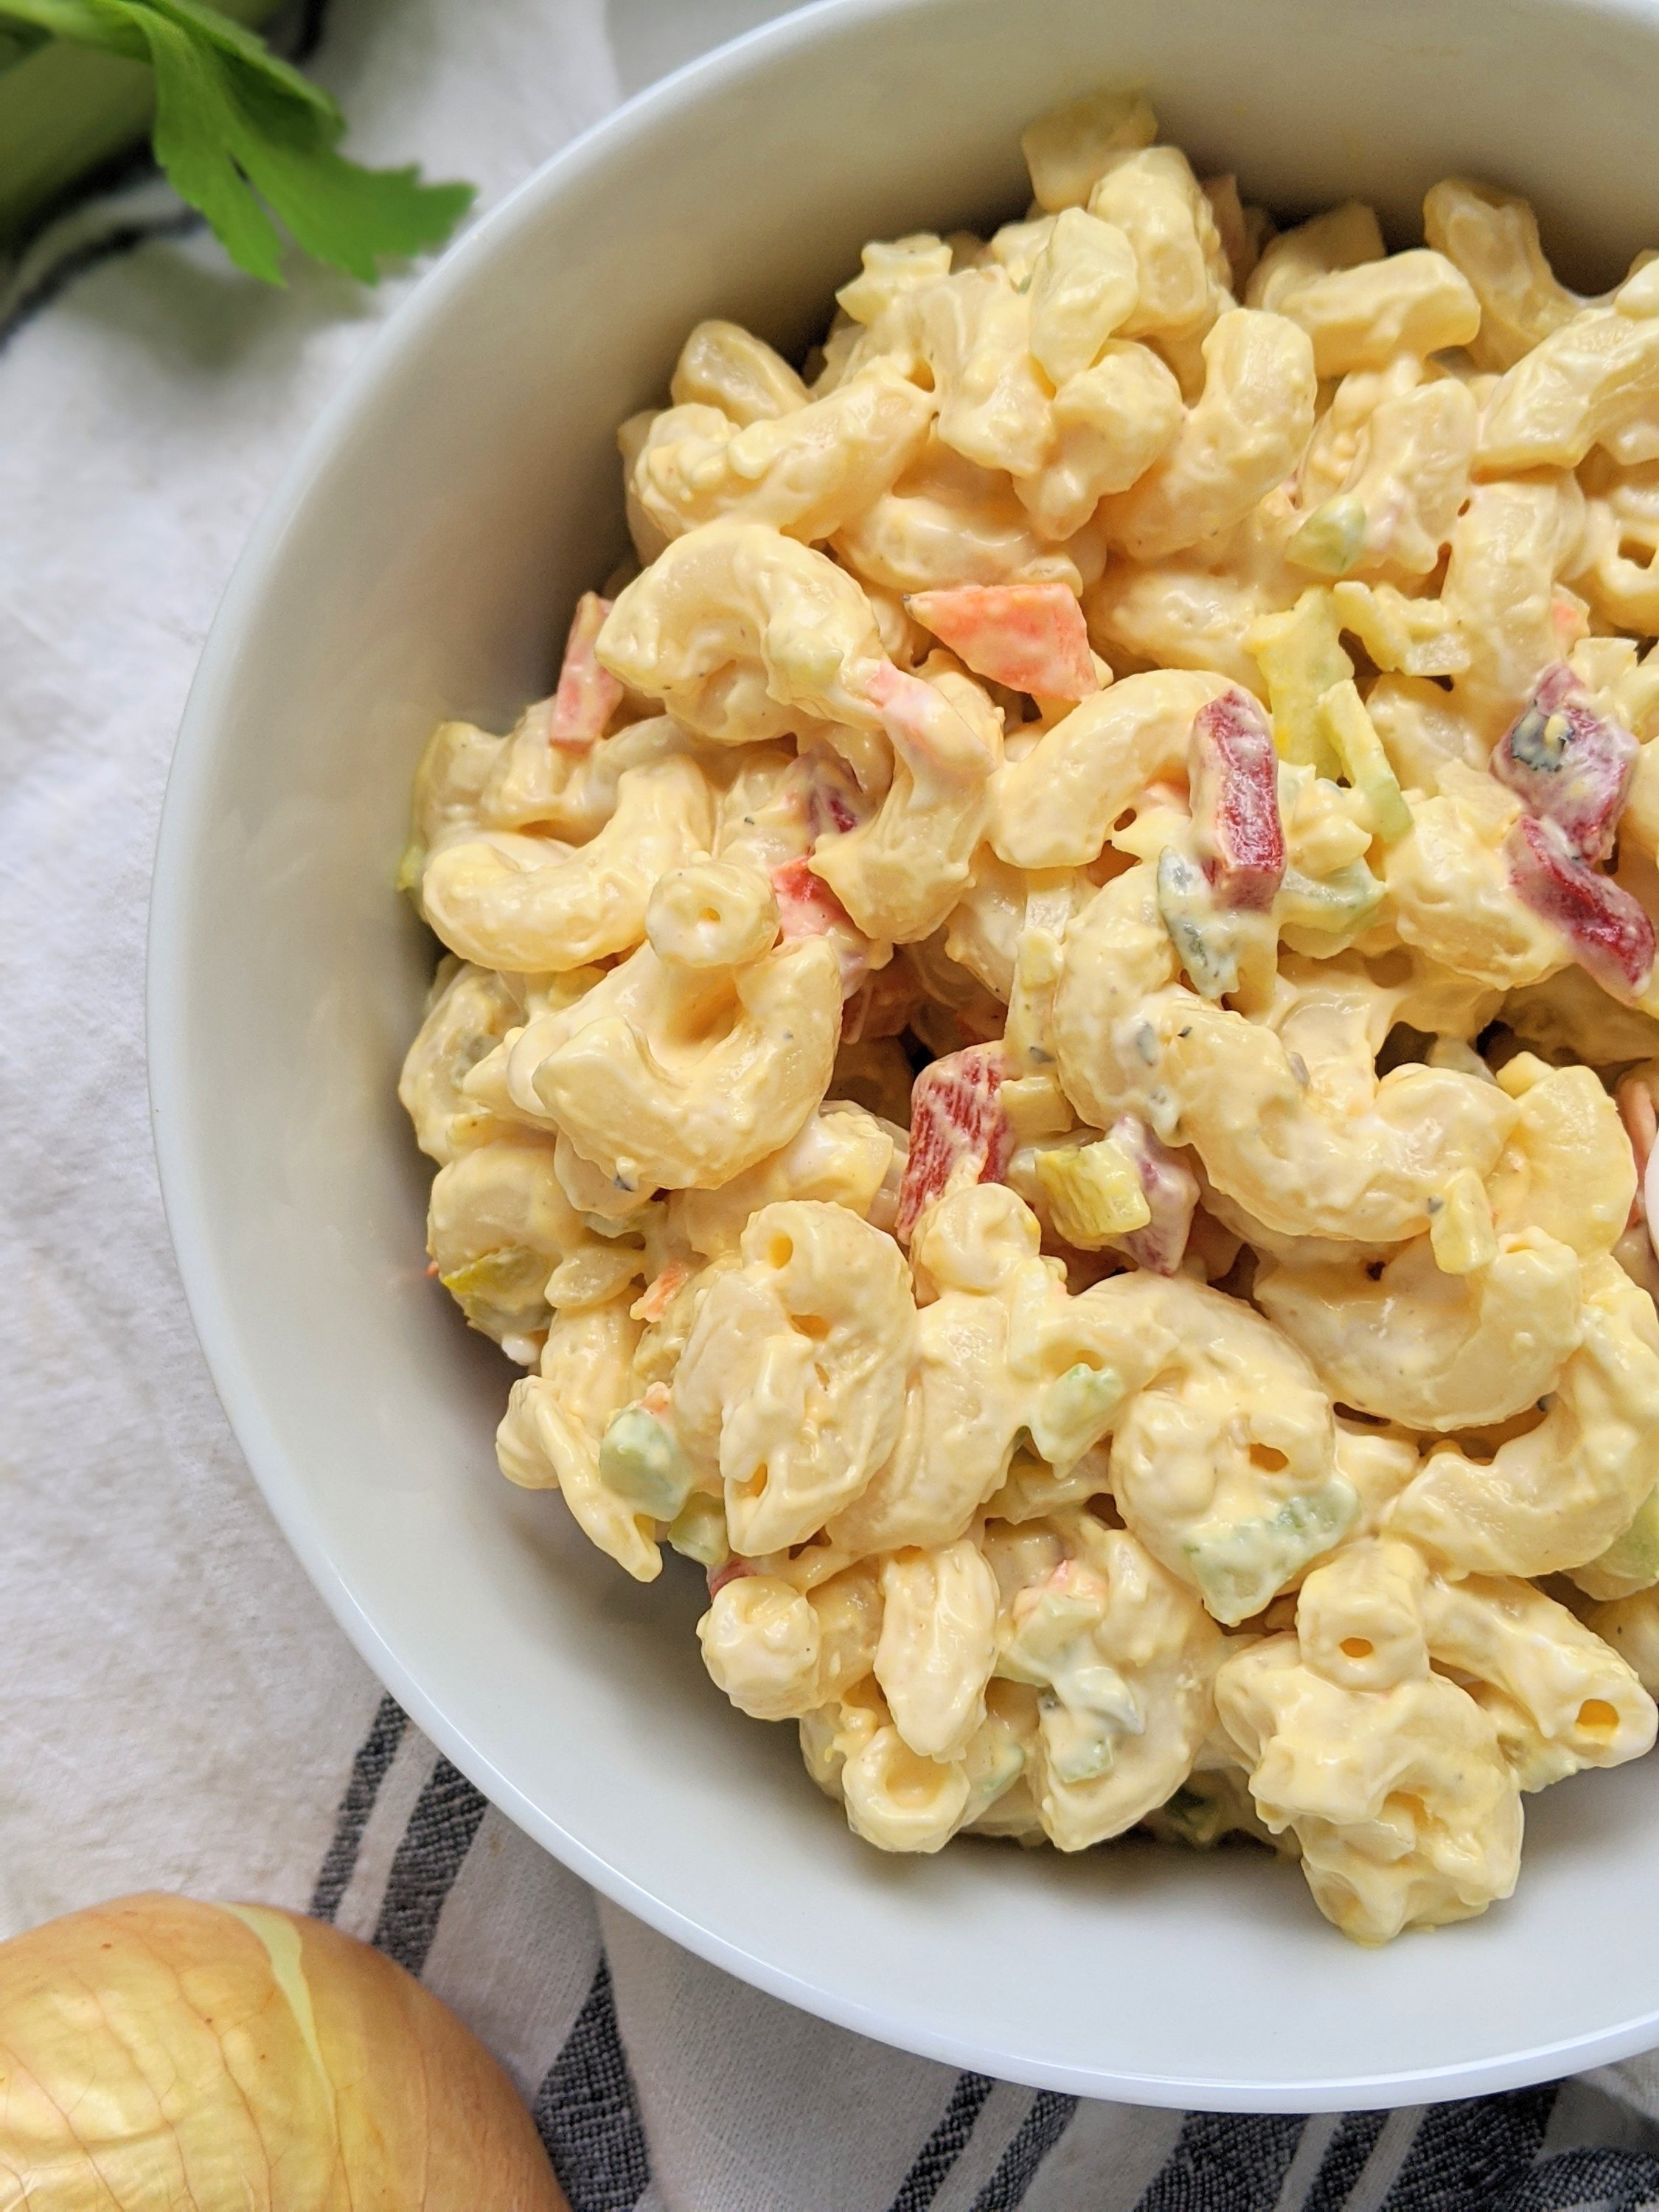 low sodium macaroni salad recipe healthy homemade macaroni salad with vegetables can be gluten free dairy free or vegetarian mac salad with eggs